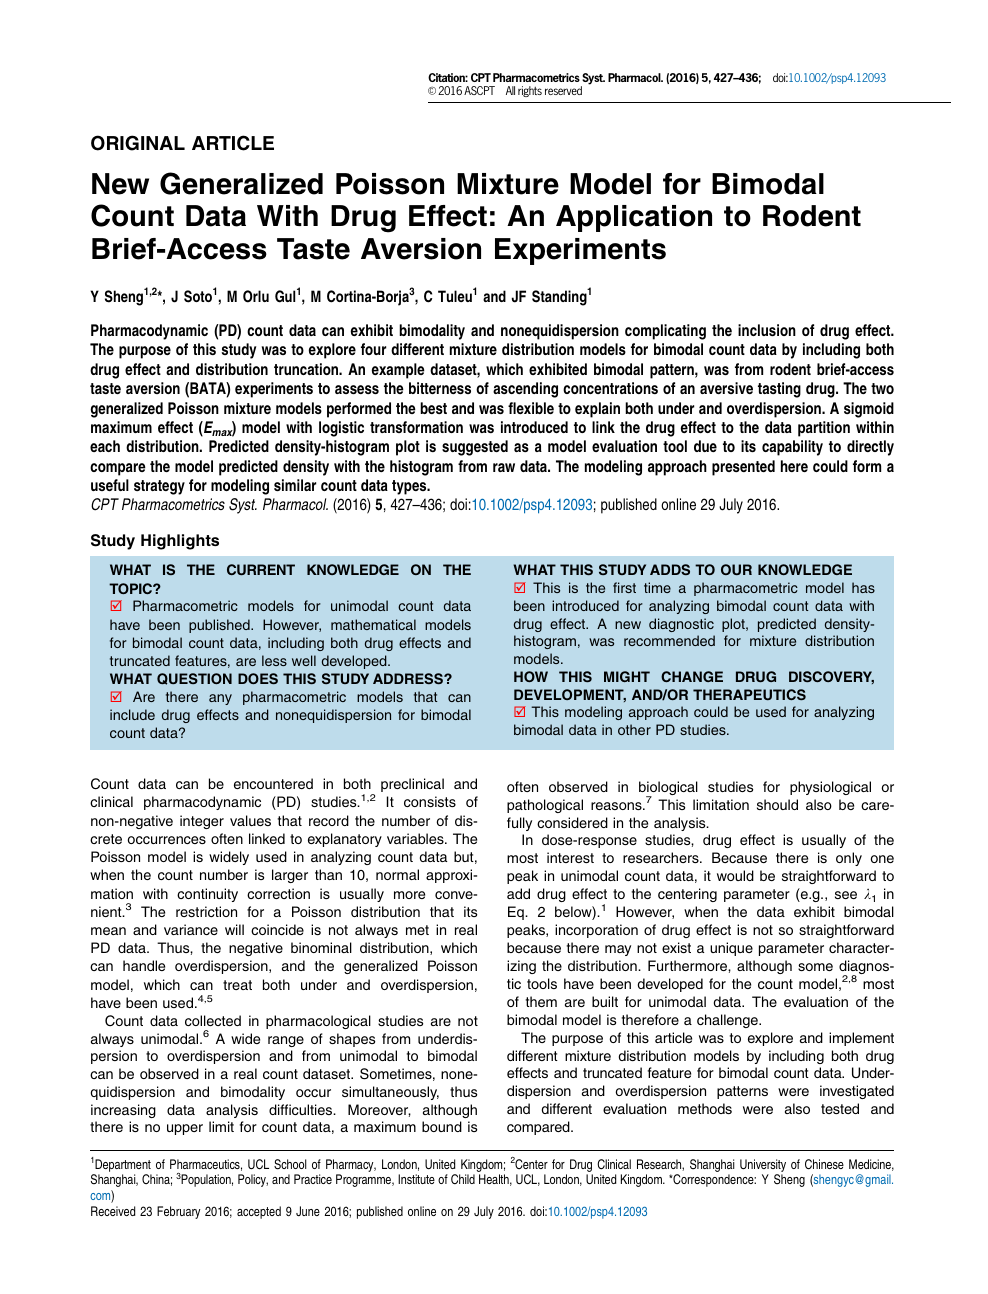 New Generalized Poisson Mixture Model For Bimodal Count Data With Drug Effect An Application To Rodent Brief Access Taste Aversion Experiments Topic Of Research Paper In Medical Engineering Download Scholarly Article Pdf